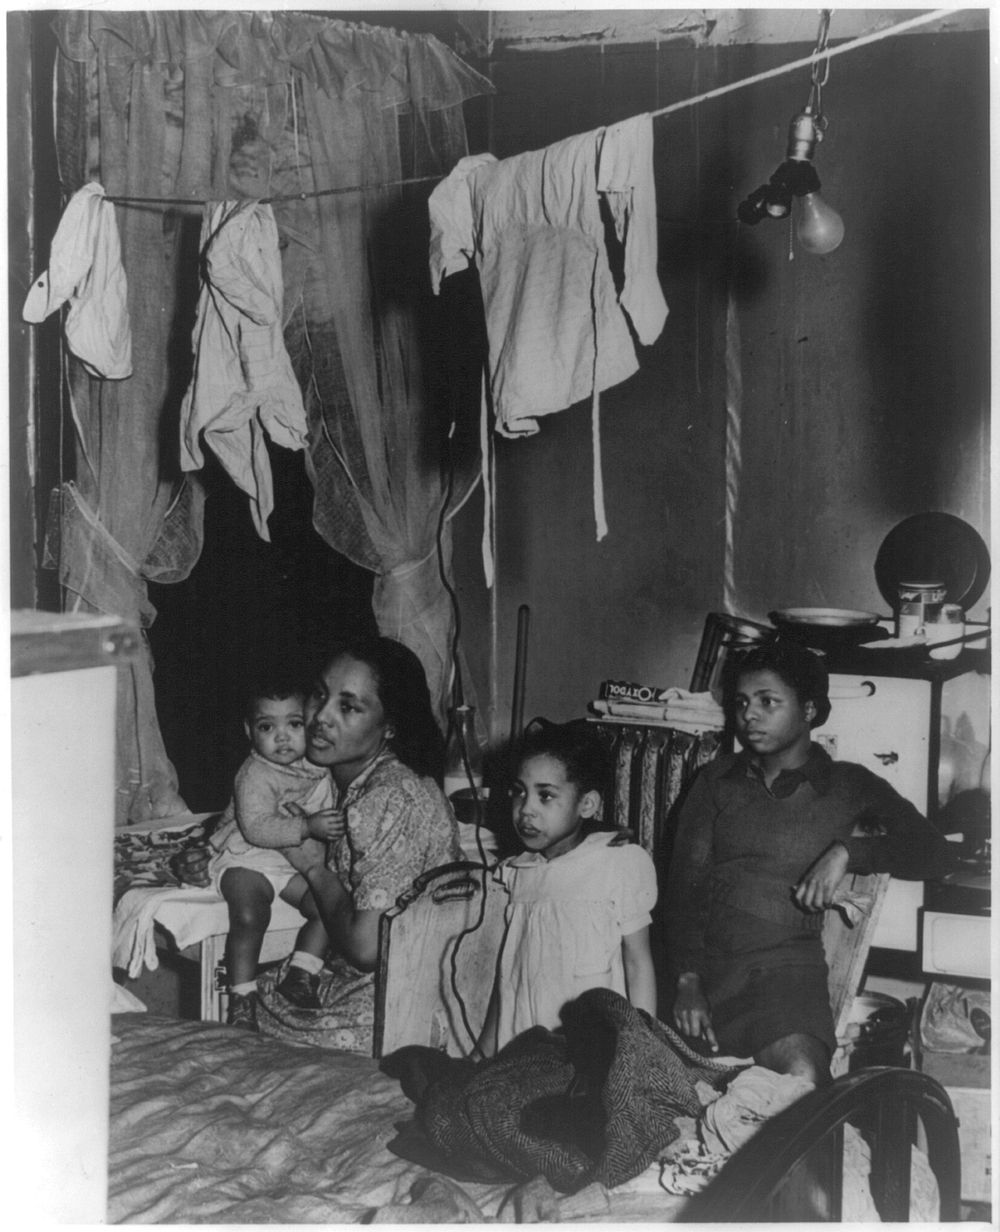 [African-American family living in crowded quarters, Chicago, Illinois] by Russell Lee